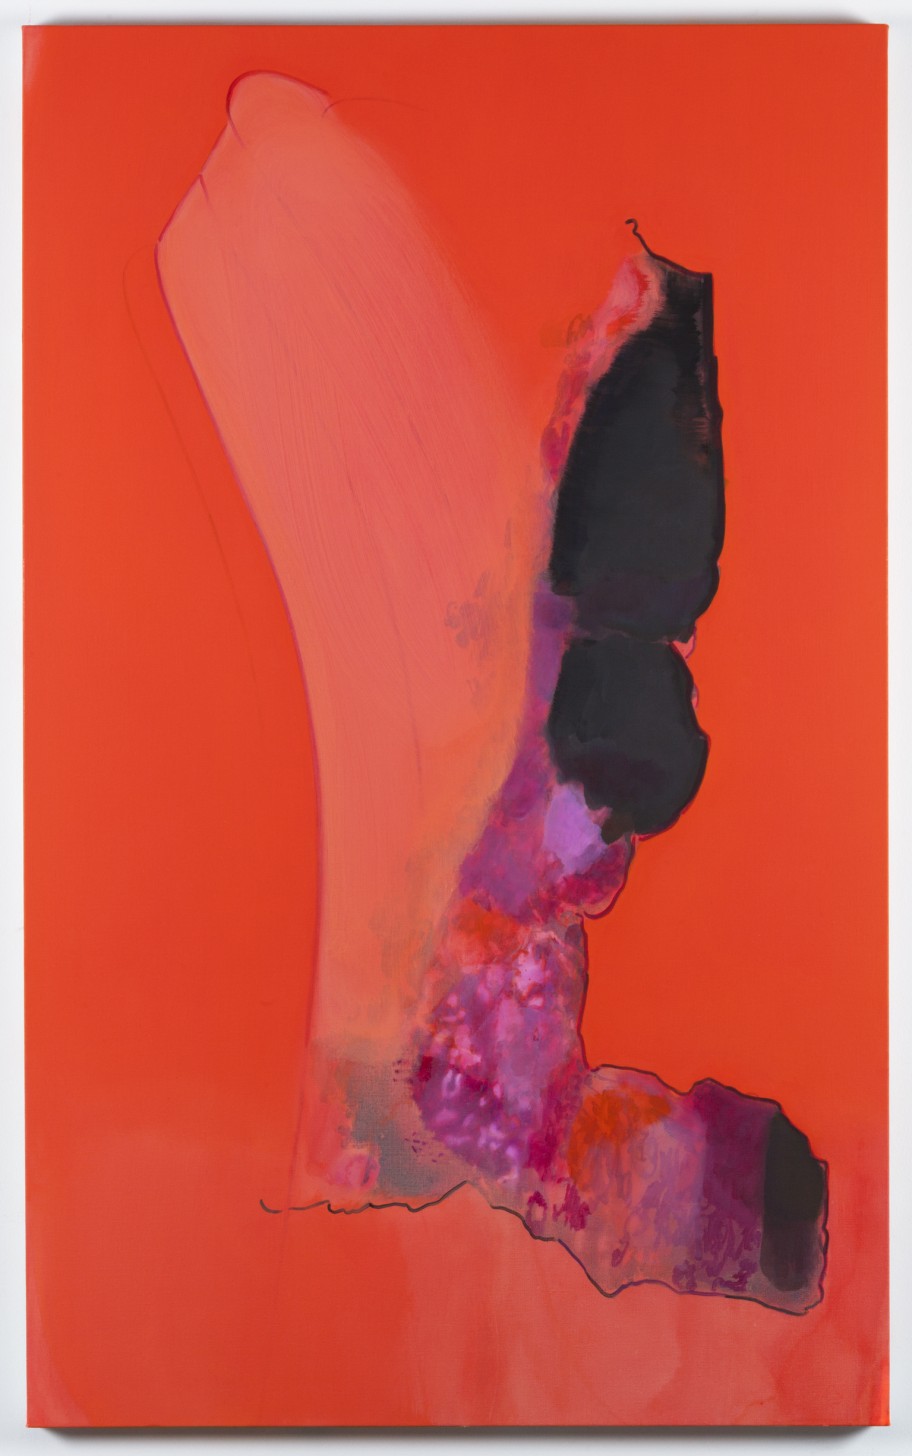 Milena Dragicevic From the Pampero Series (Ragnr), 2013Oil and acrylic on linen 148 x 91,5 cm 